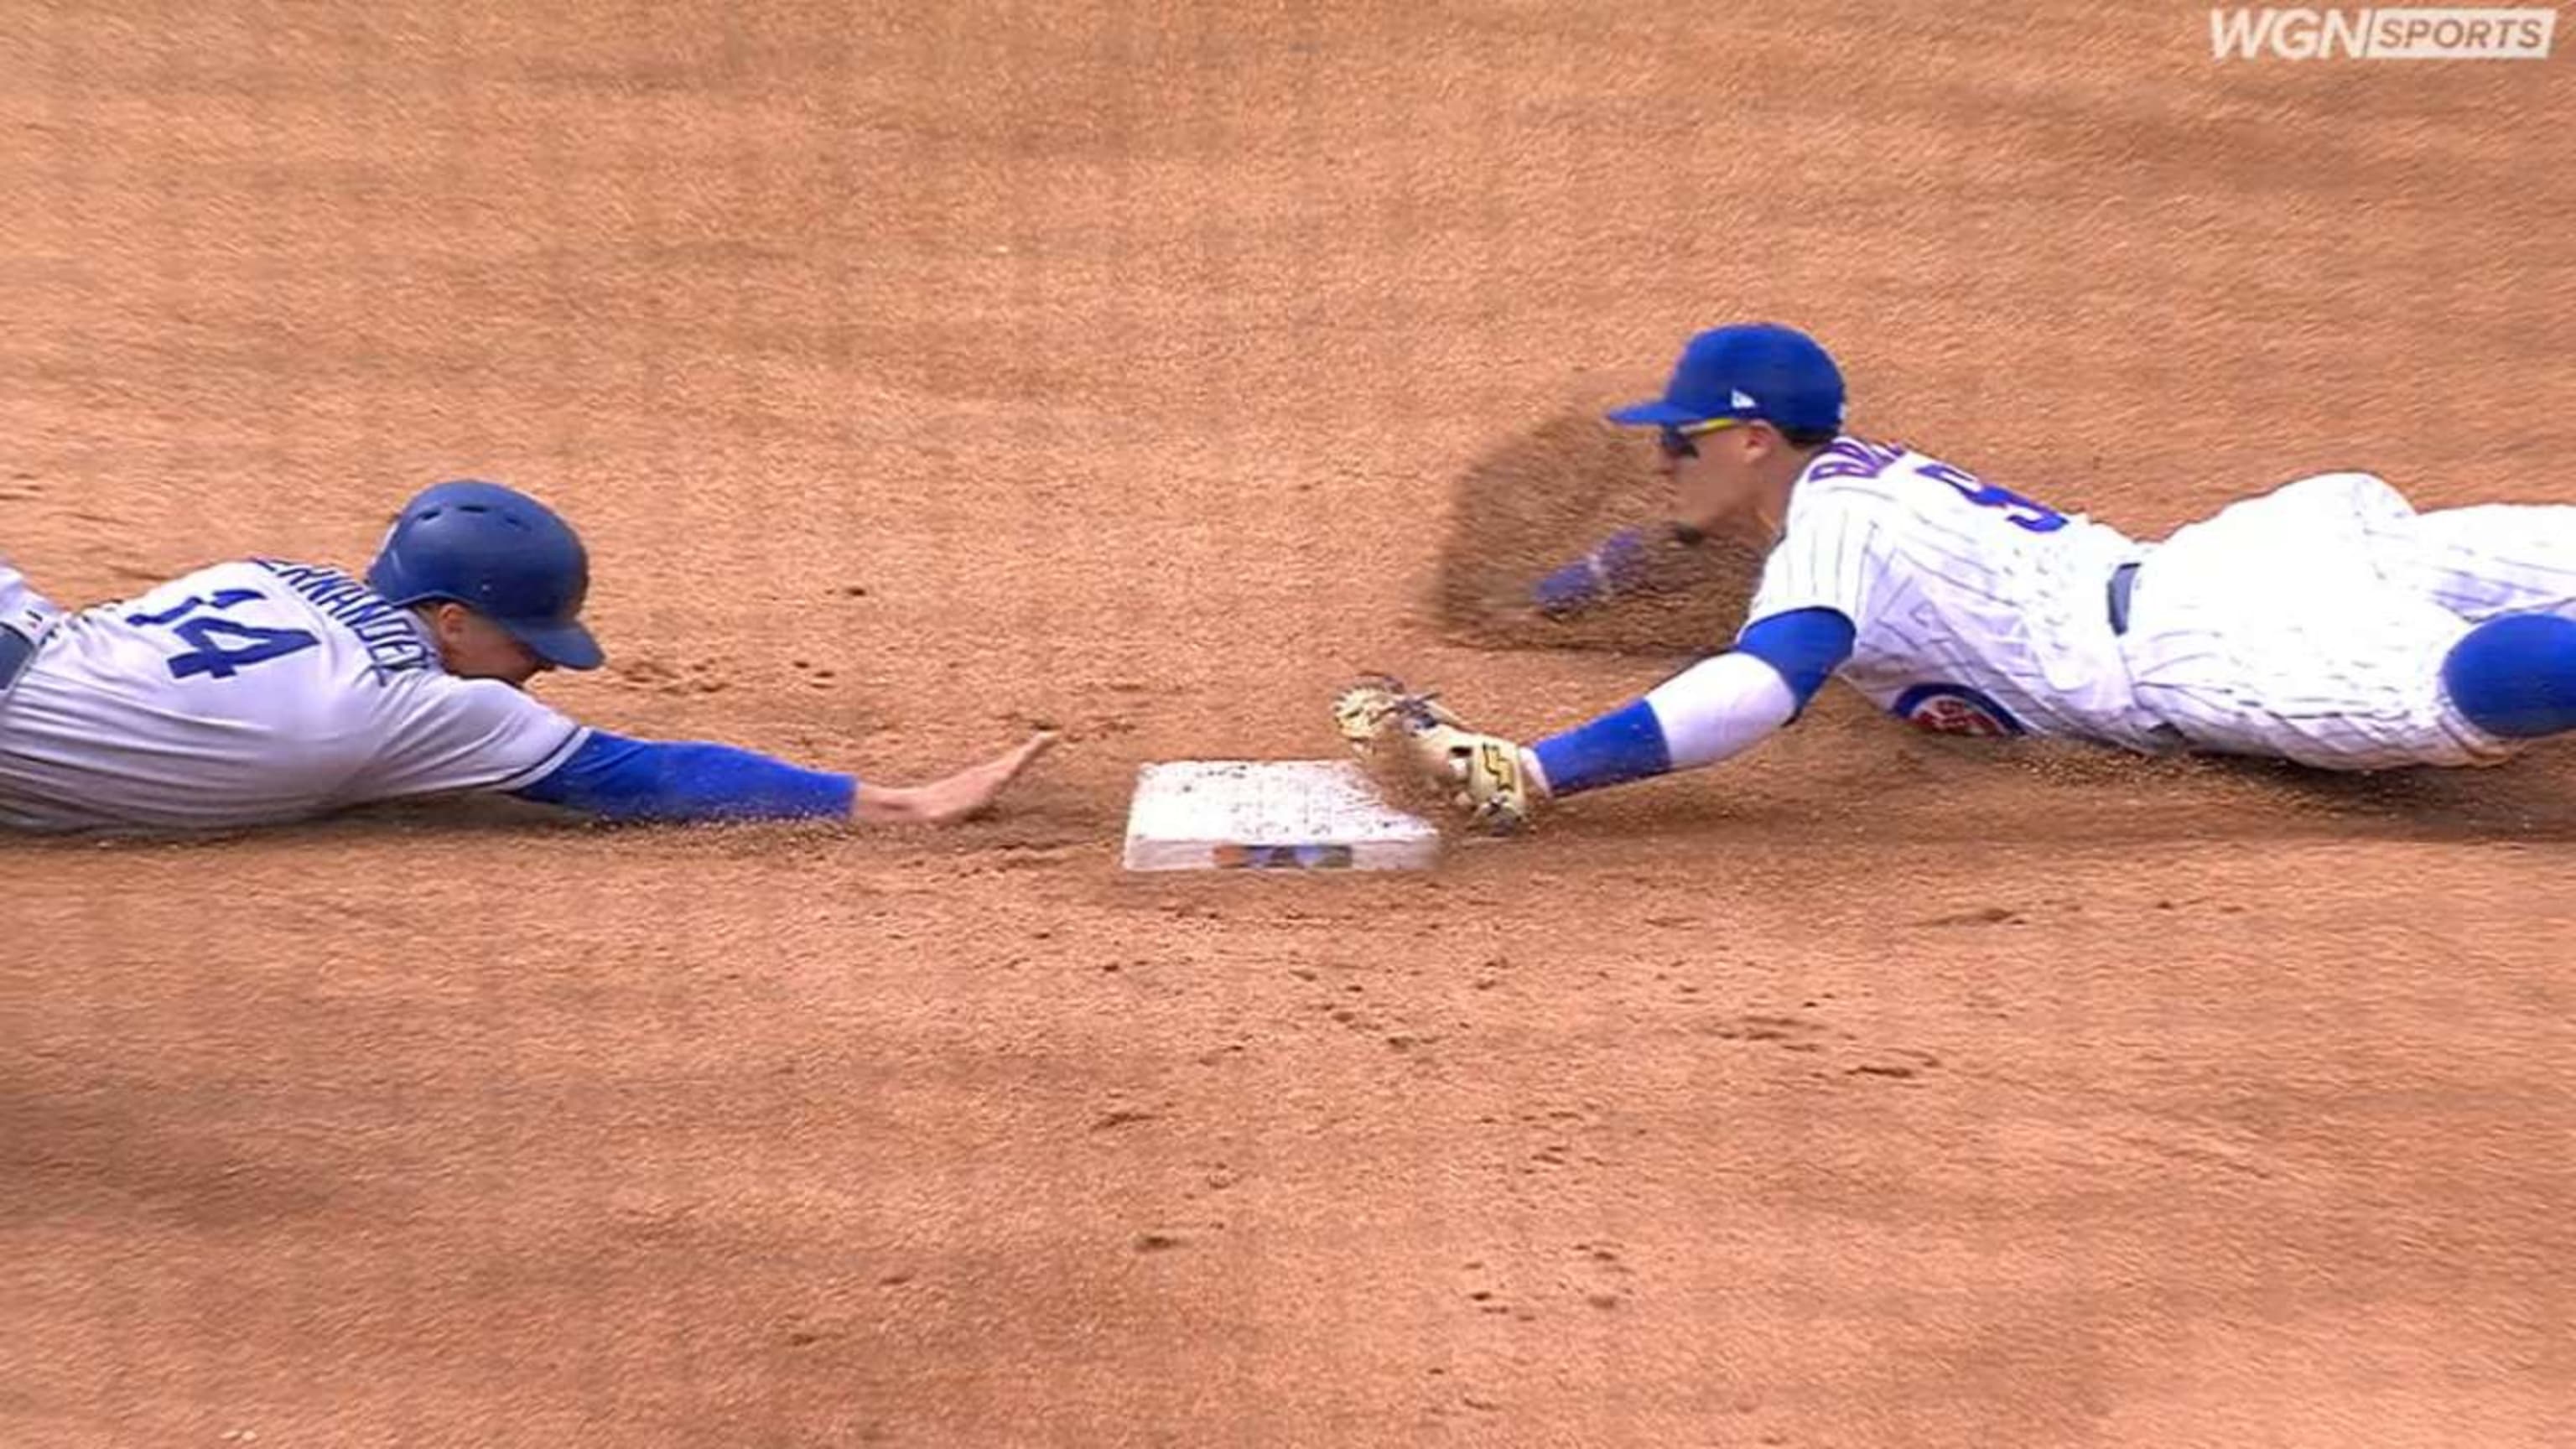 Javy Baez busts a MOVE to reach first base 